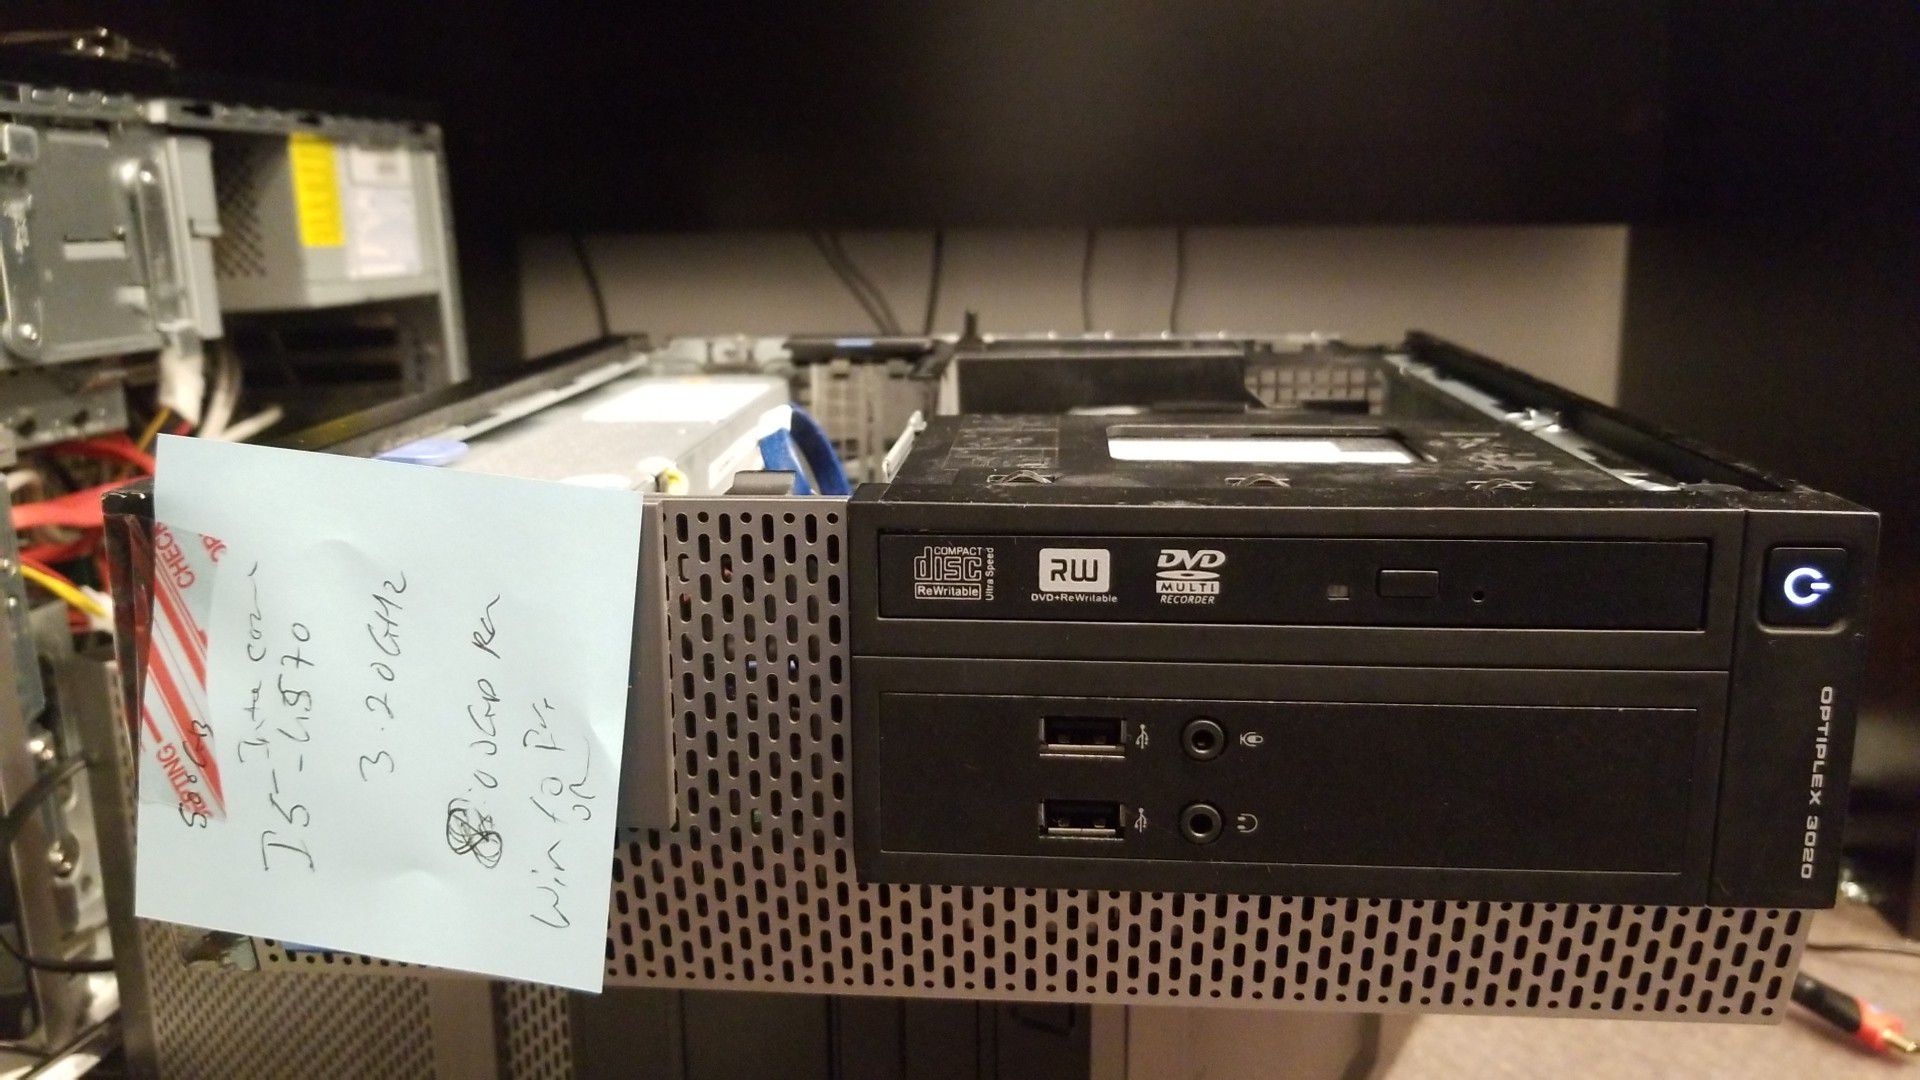 Dell optiplex 3020 tower only